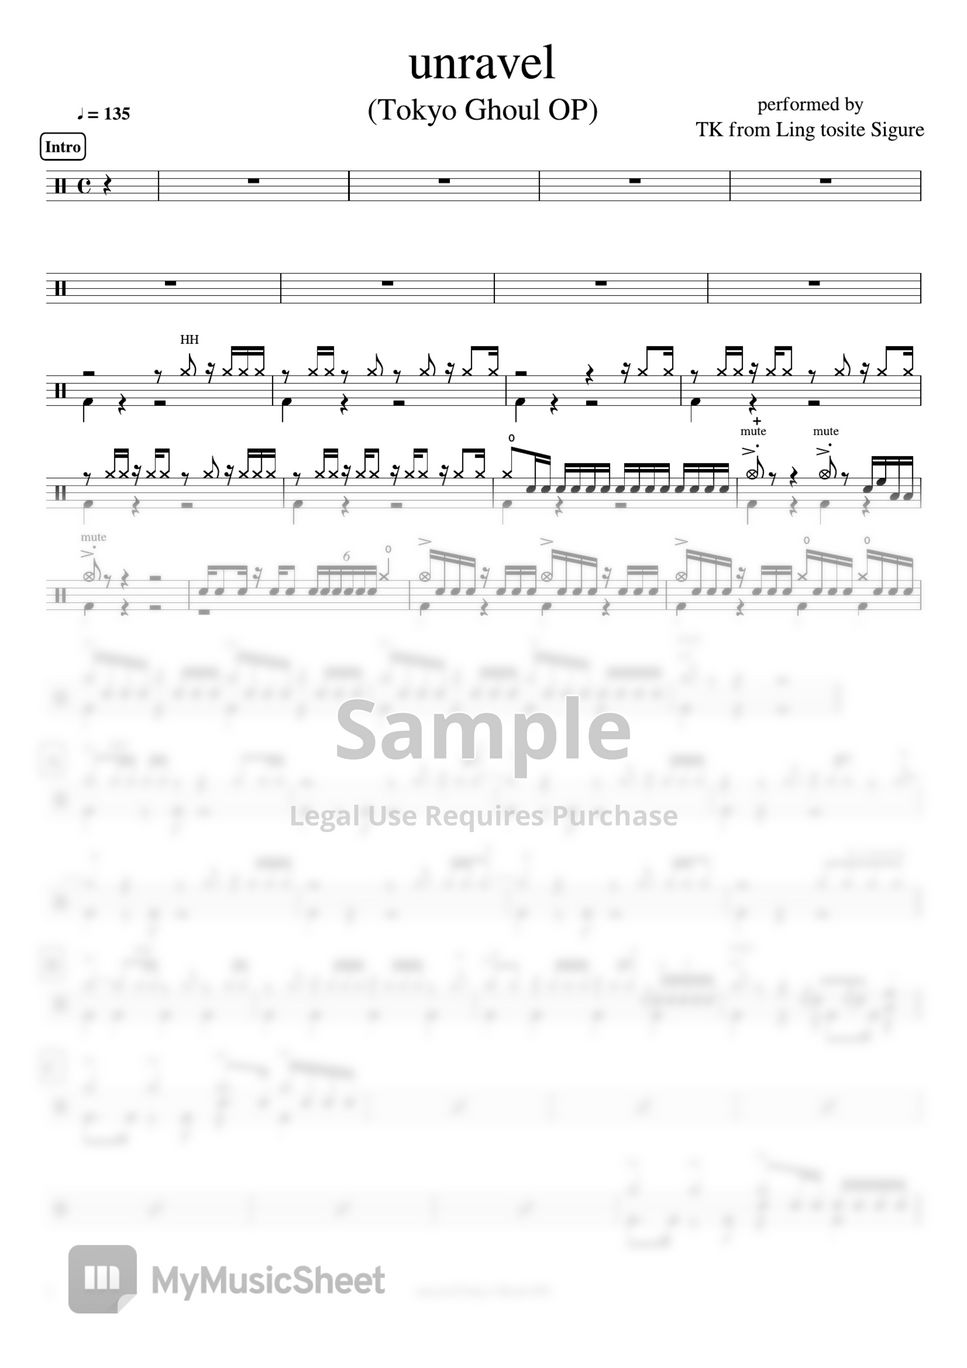 TK from Ling tosite Sigure - unravel (Tokyo Ghoul OP) by Cookai's J-pop Drum sheet music!!!